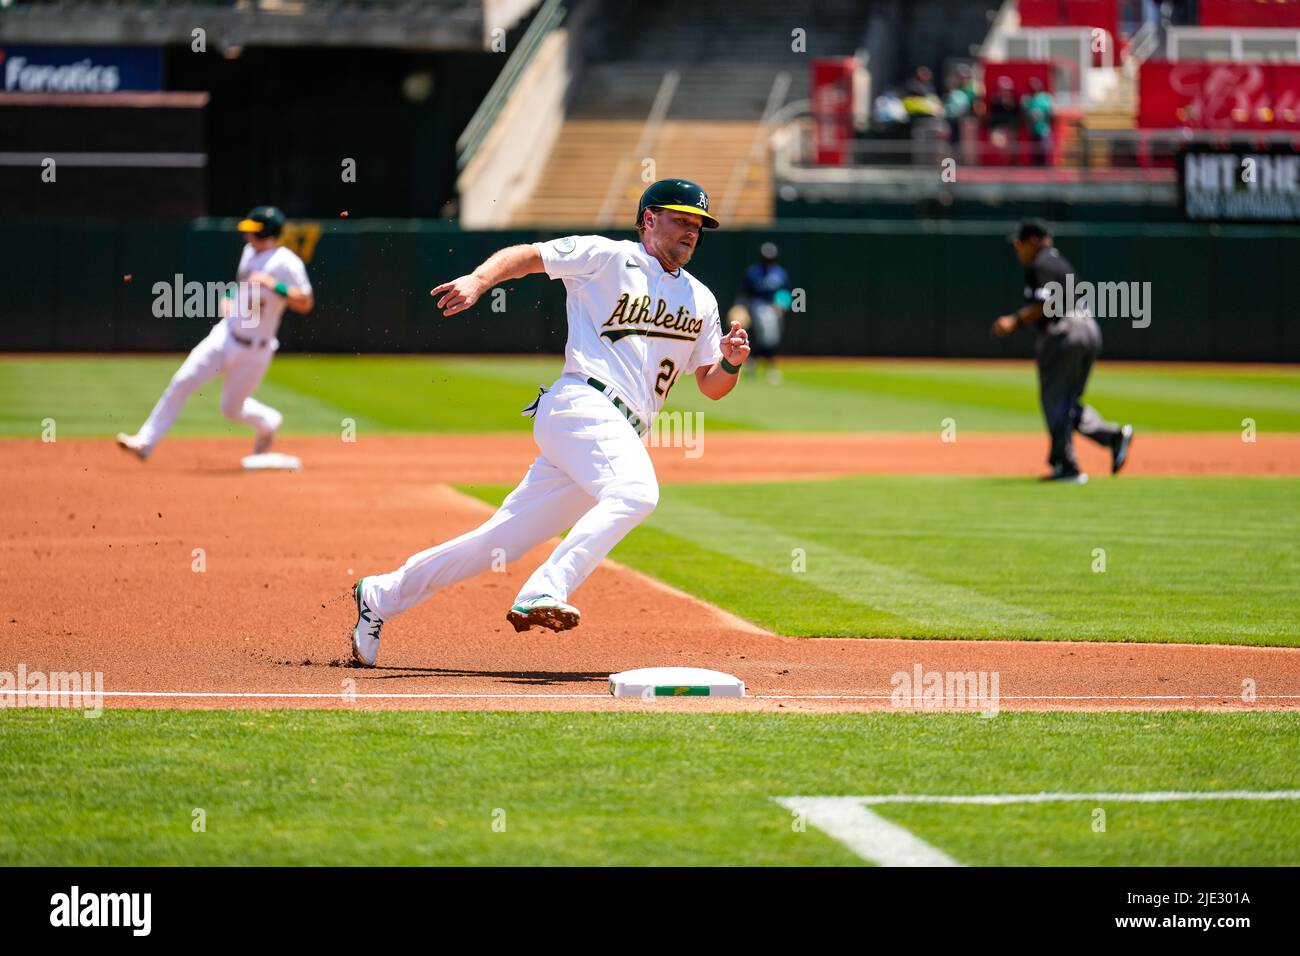 Oakland Athletics Infielder Sheldon Neuse (26) runs to third base during an MLB game between Seattle Mariners and Oakland Athletics at the RingCentral Stock Photo